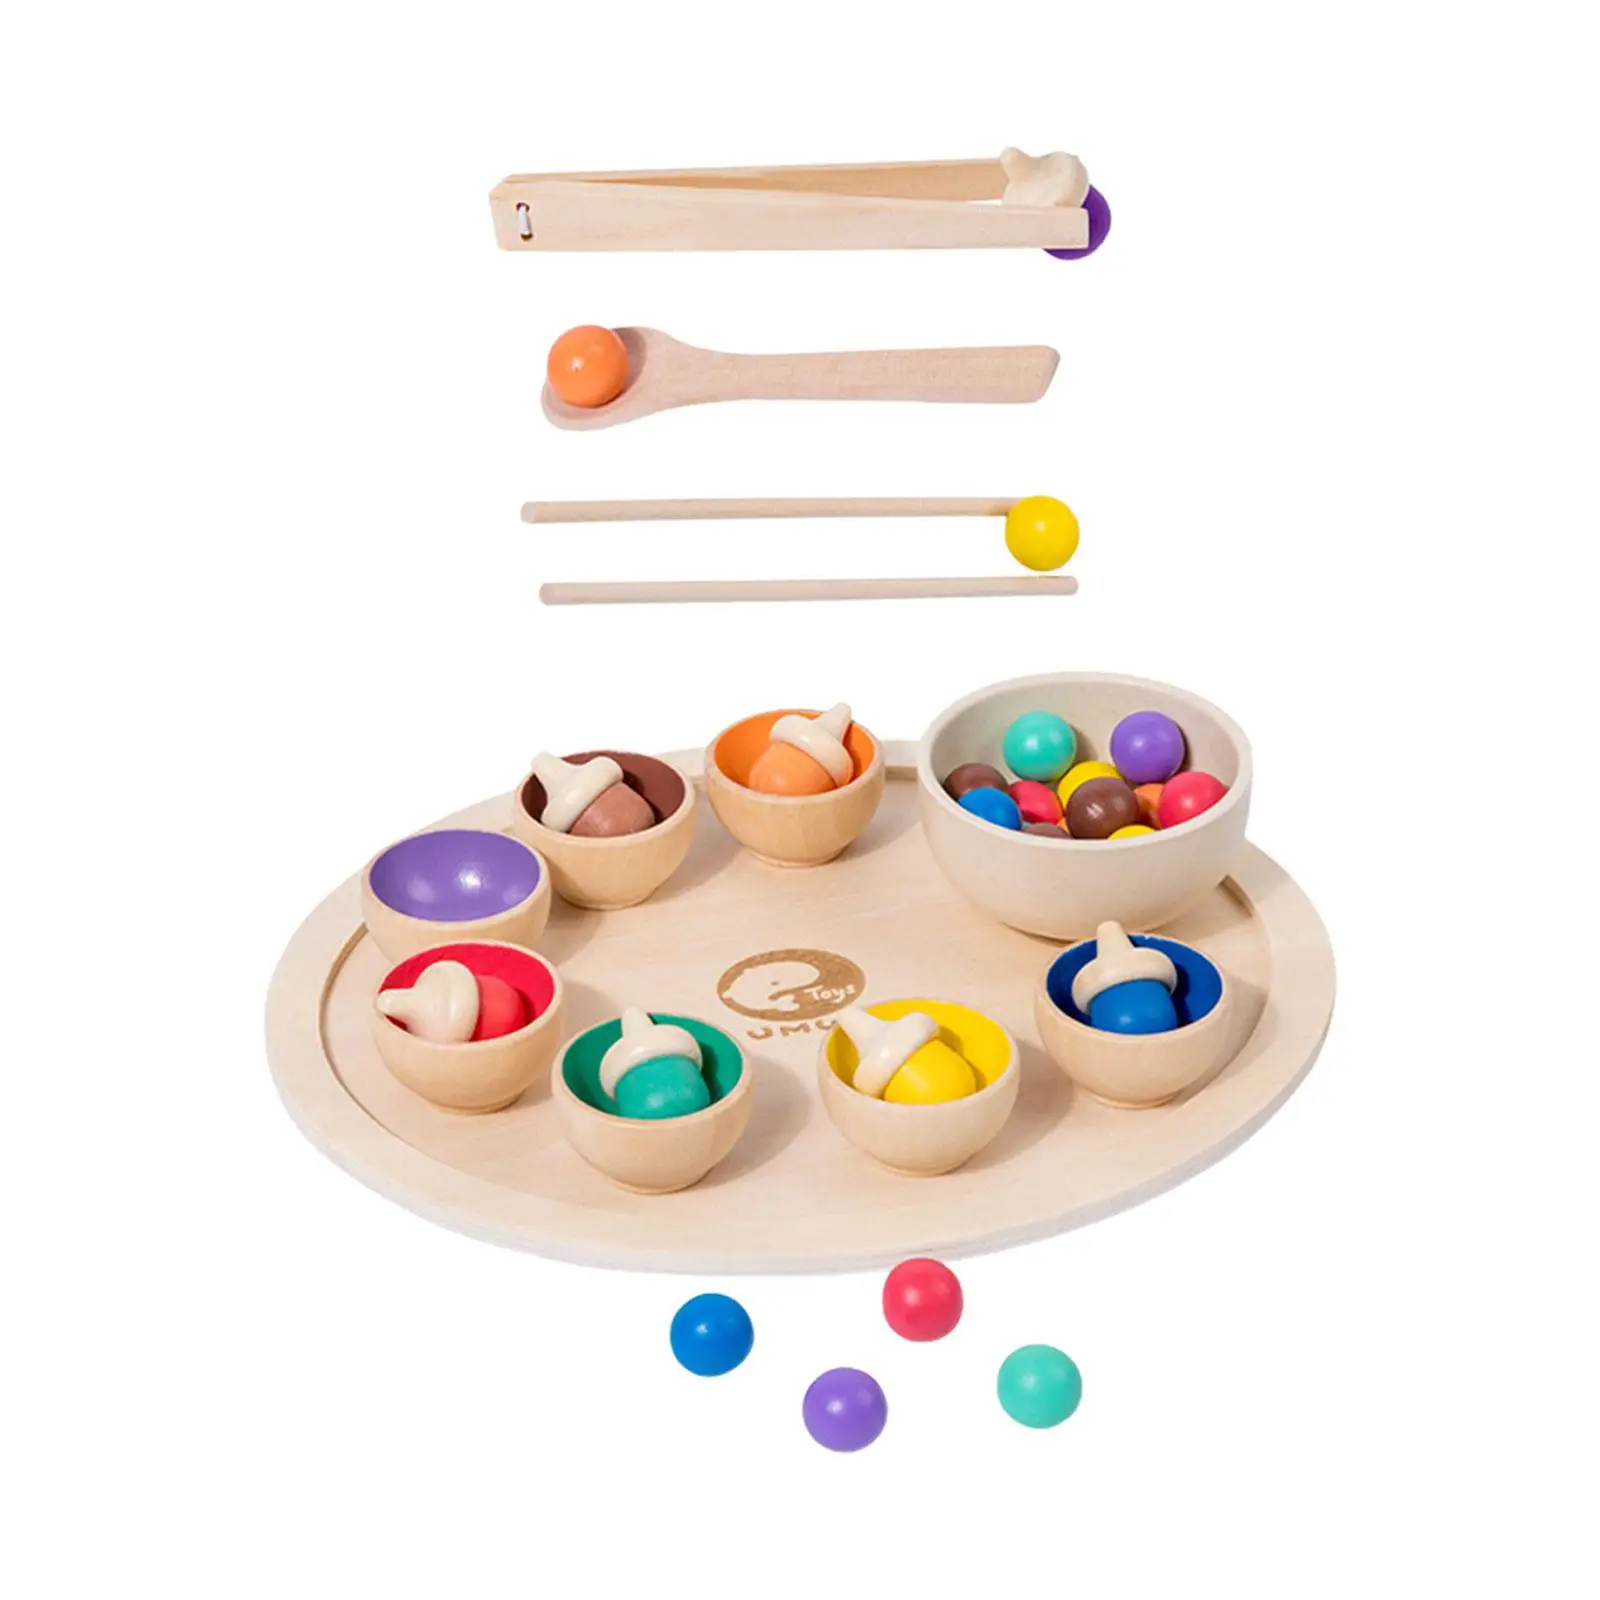 Montessori Bowls Toy Balls Matching Color Sorting and Counting Board Montessori Toy for Baby 1+ Year Old Kids Children